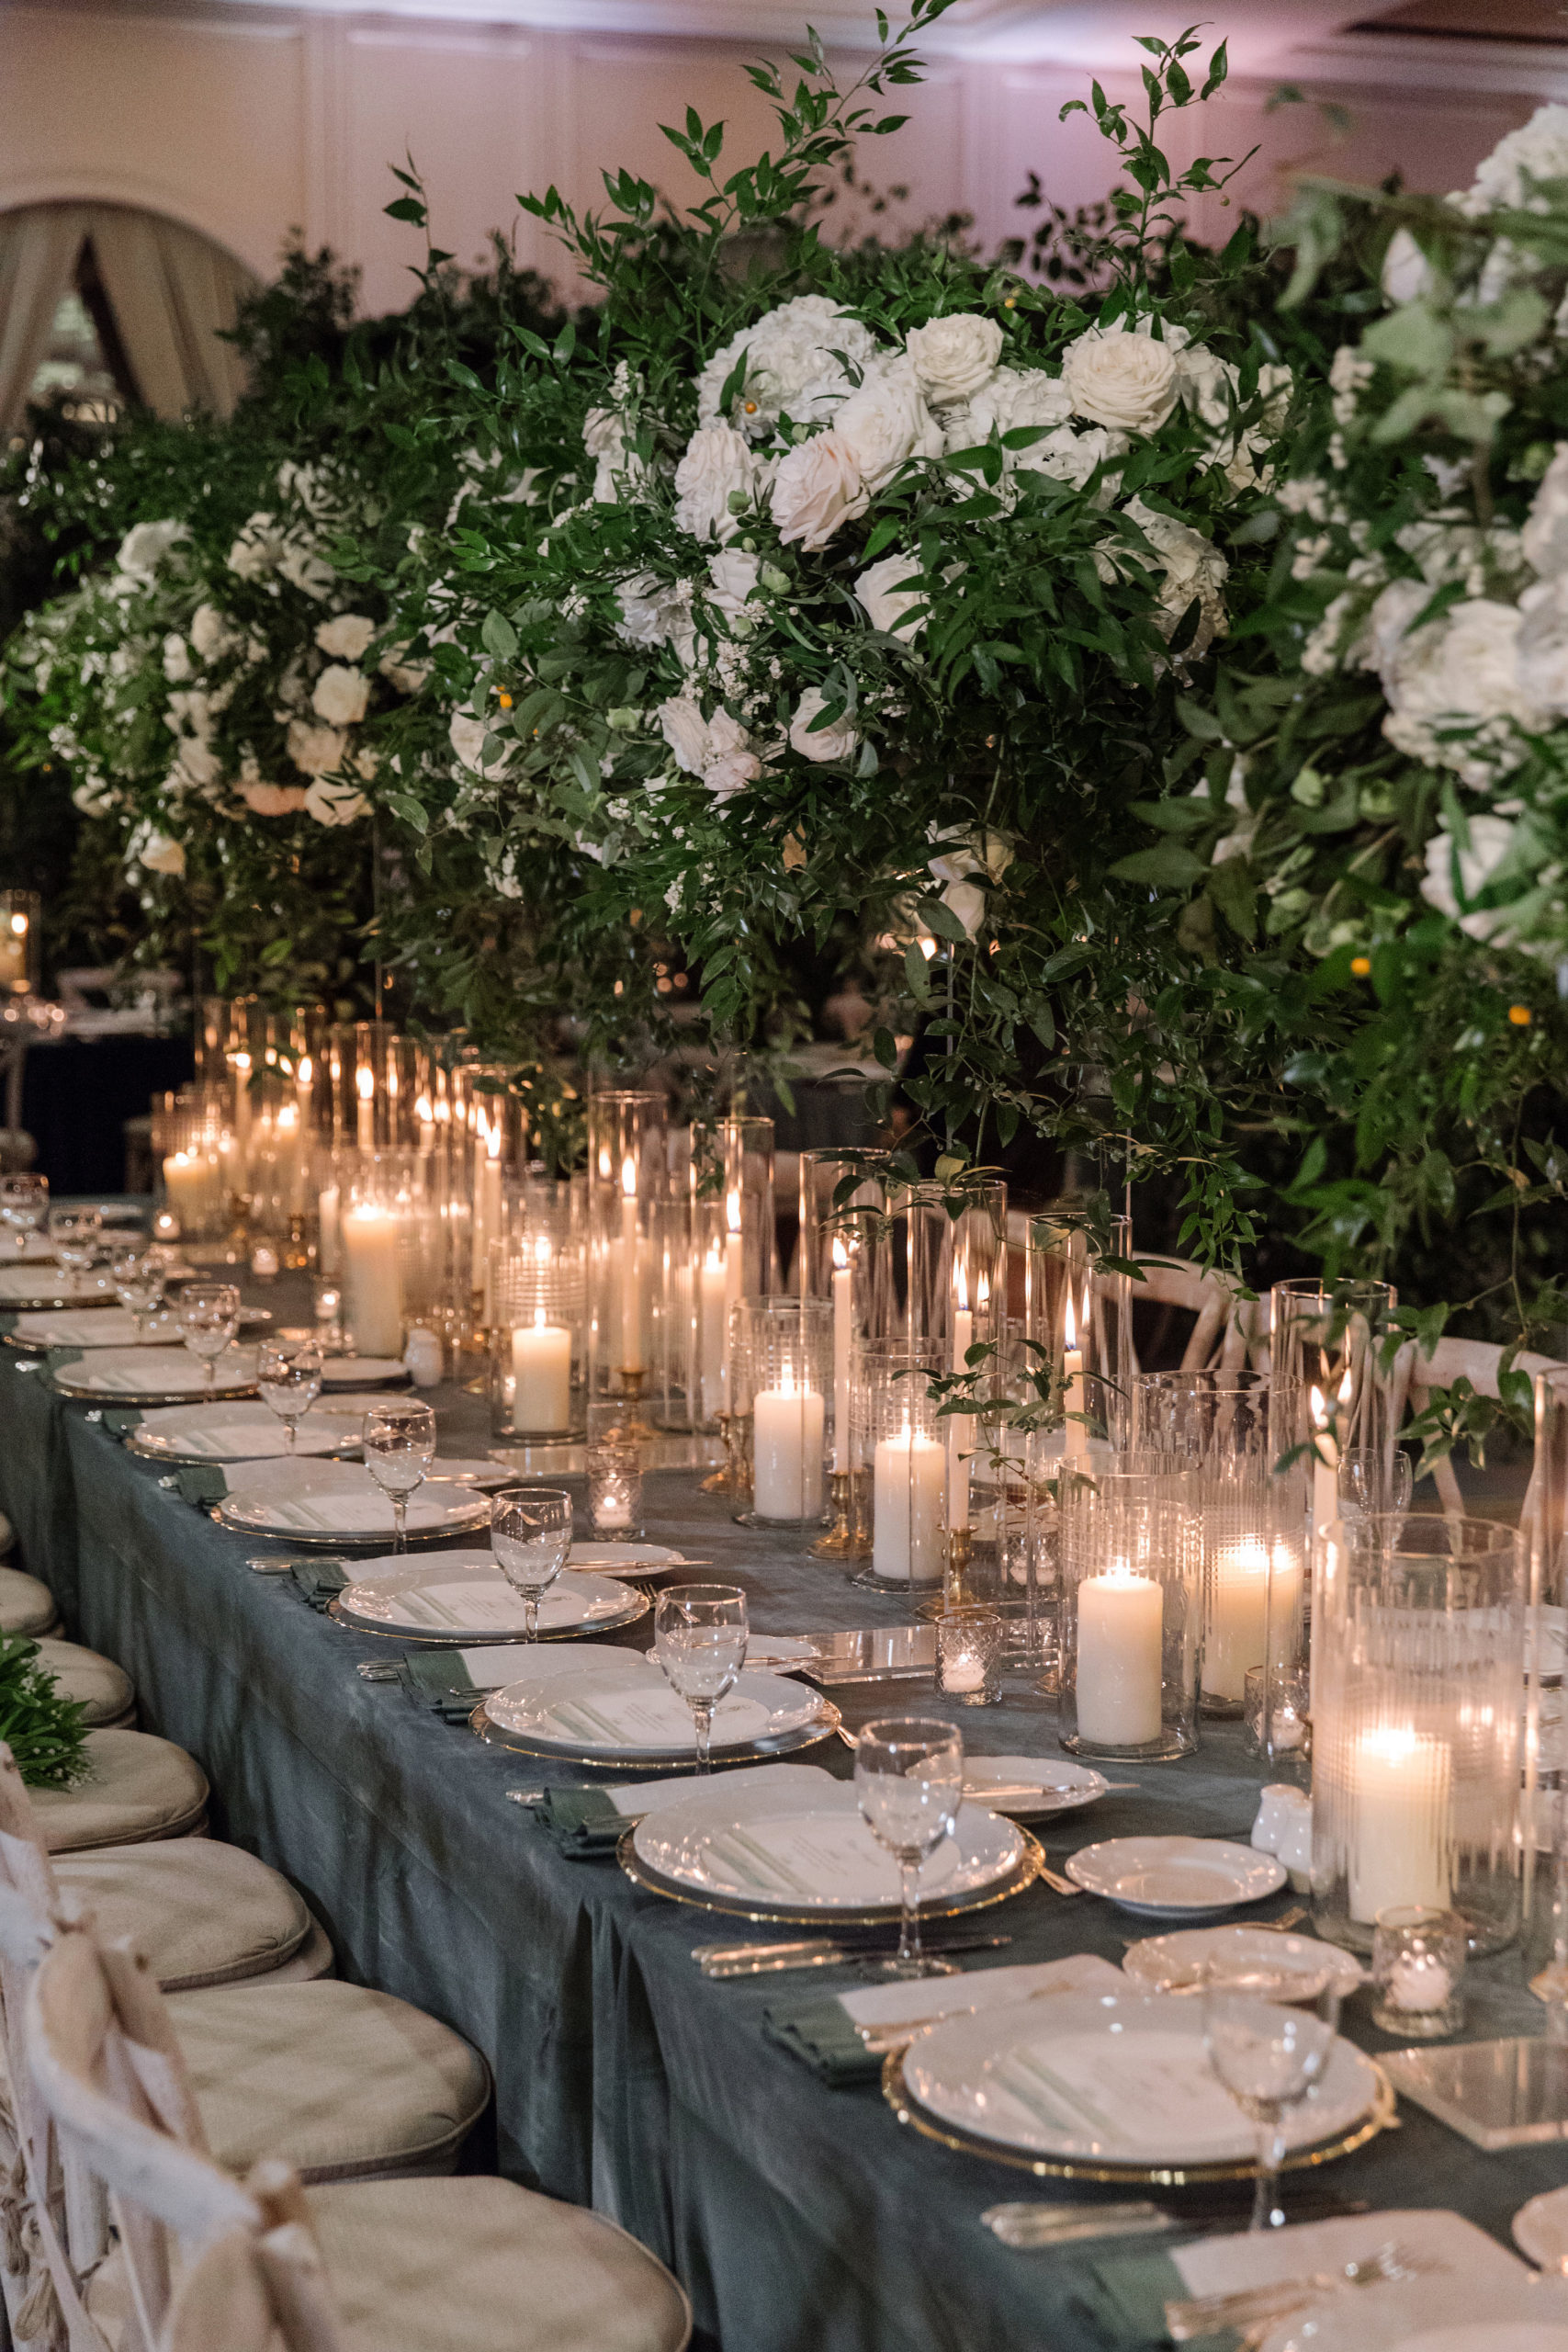 Tablescape Inspiration - Soft and Moody Vibe